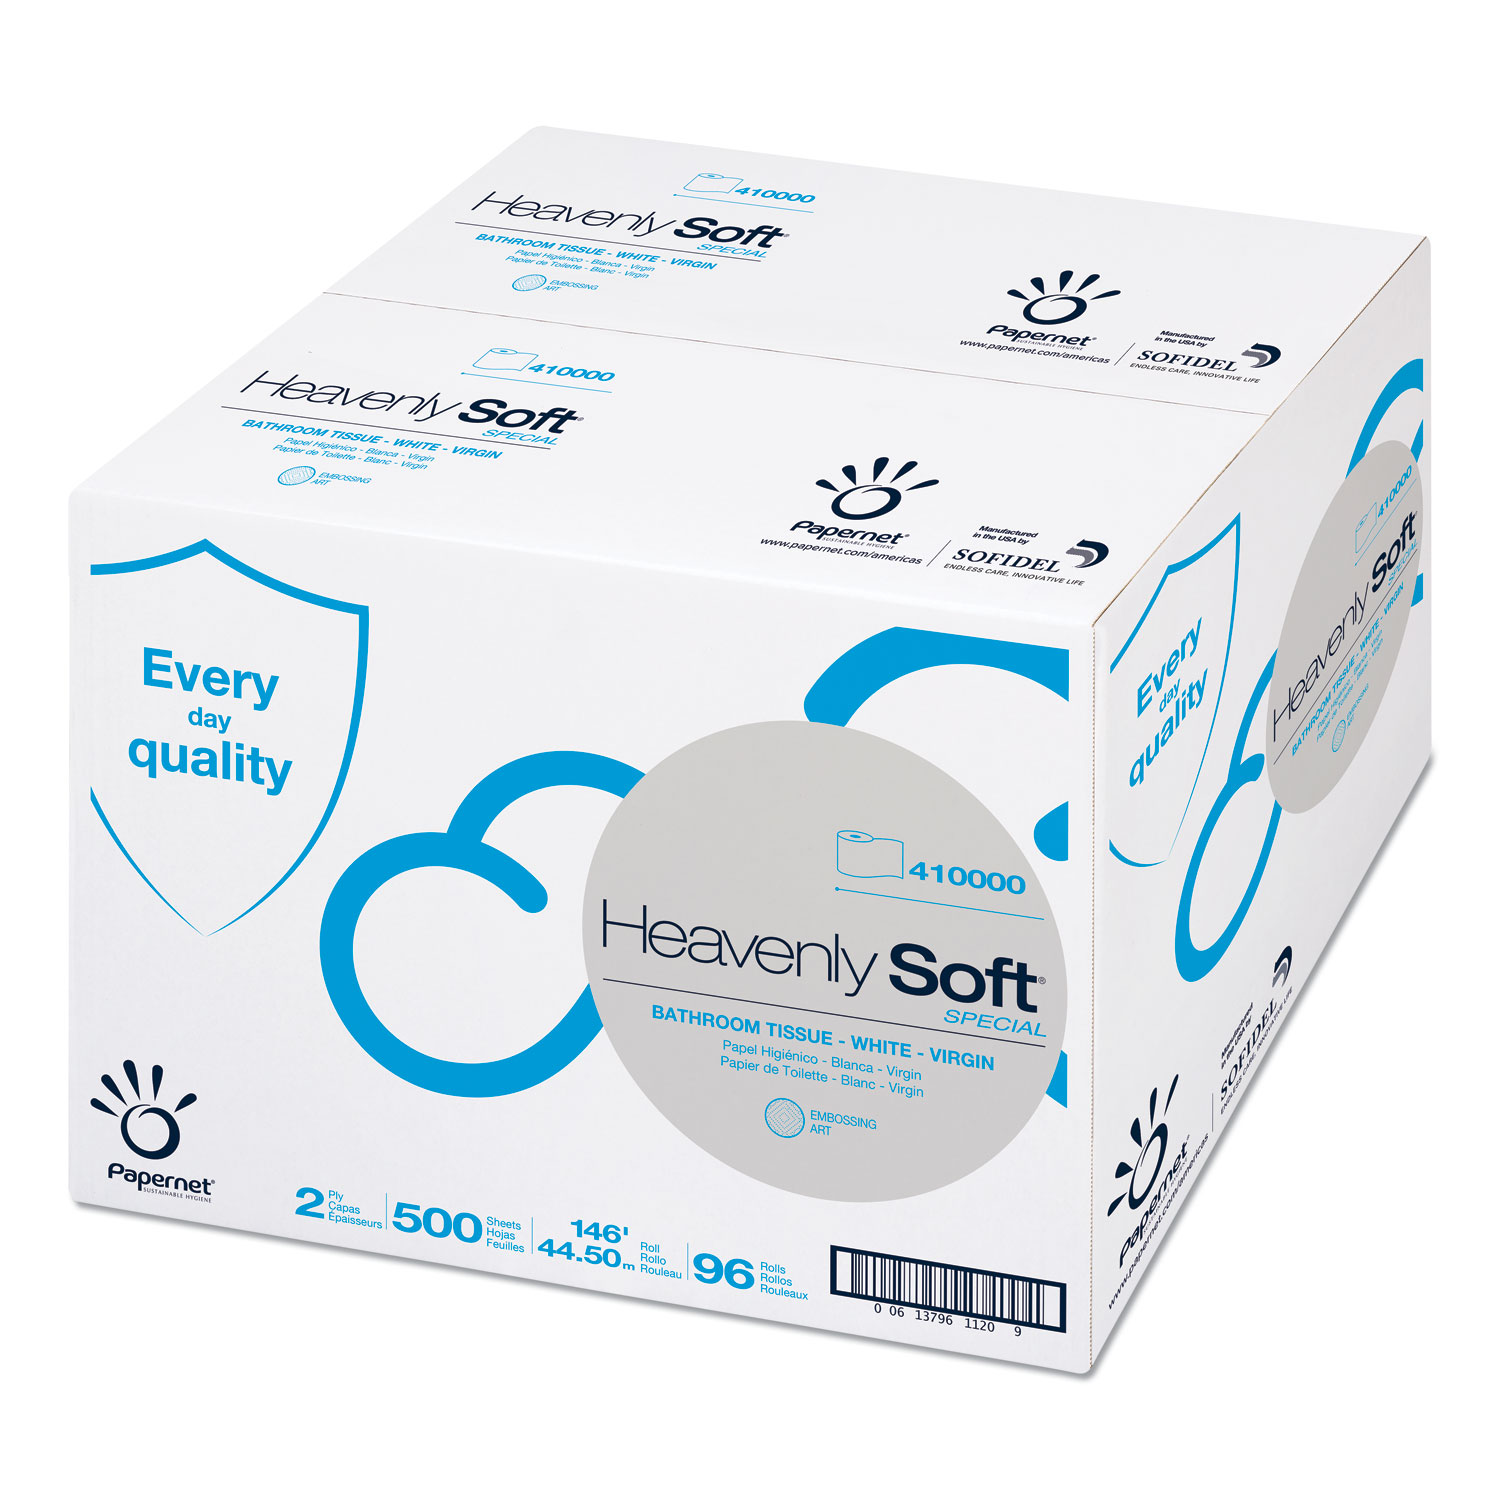  Papernet 410000 Heavenly Soft Toilet Tissue, Septic Safe, 2-Ply, White, 5 x 146 ft, 500 Sheets/Roll, 96 Rolls/Carton (SOD410000) 